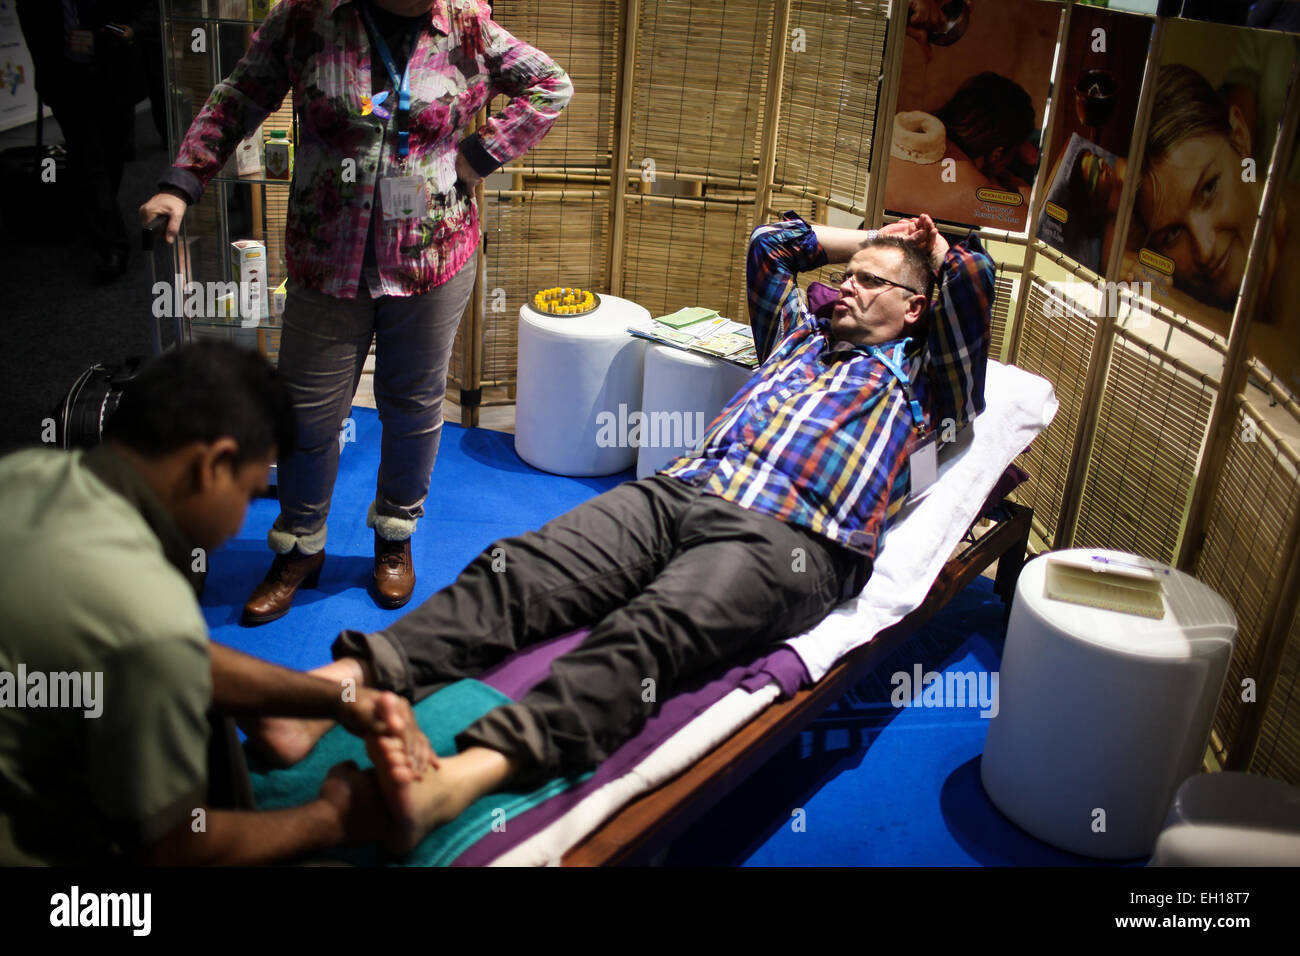 Berlin, Germany. 4th Mar, 2015. A visitor enjoys foot massage at the stand  of Sri Lanka during the Berlin International Tourism Fair (ITB), in Berlin,  Germany, on March 4, 2015. ITB, one